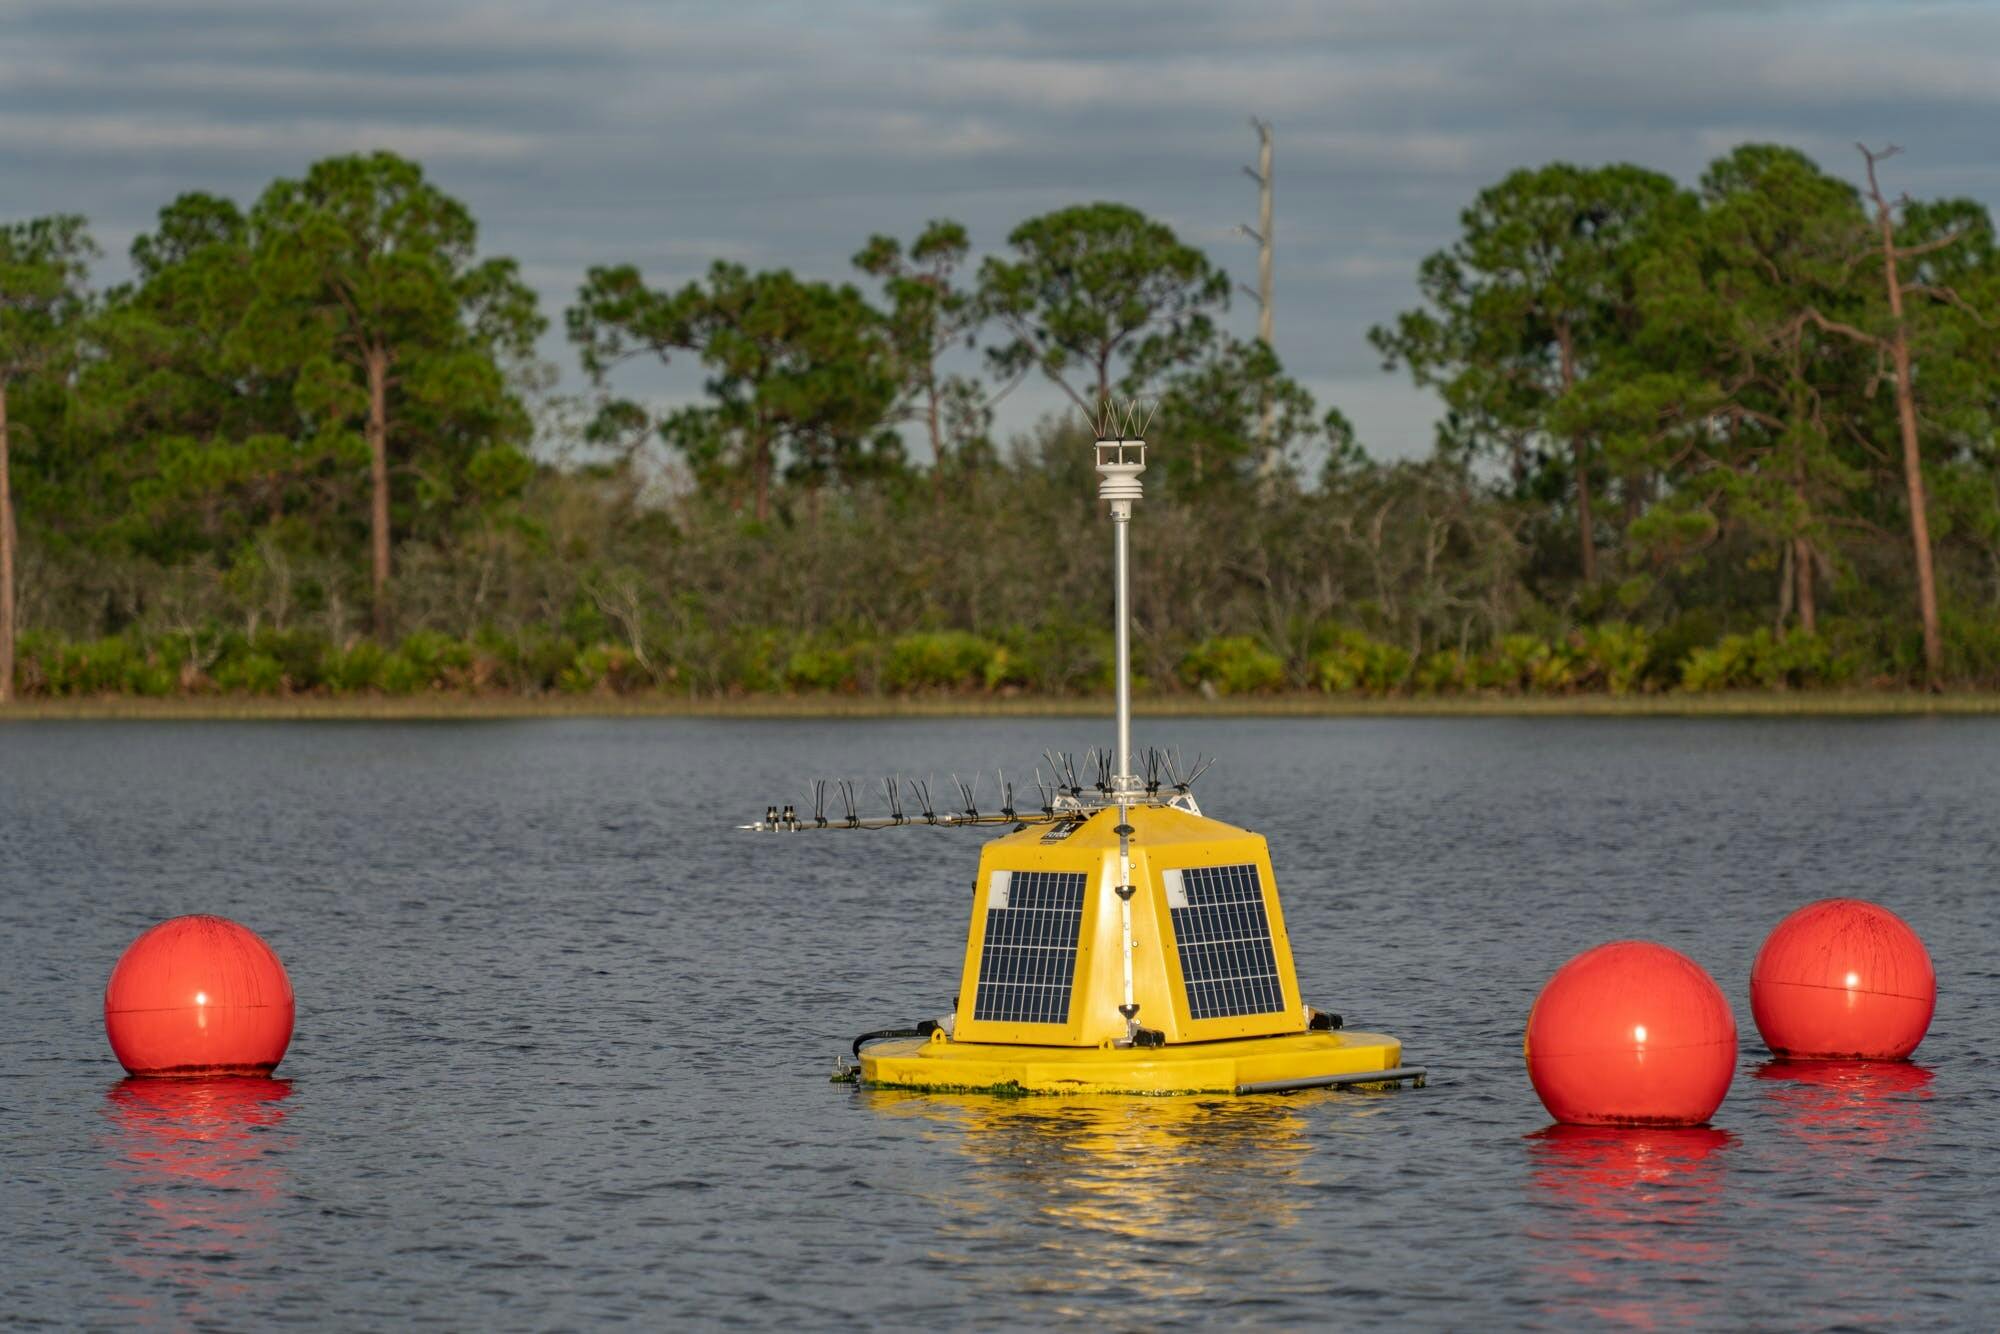 Lake Annie Buoy deployed, June 2022. Photo by Kevin Main